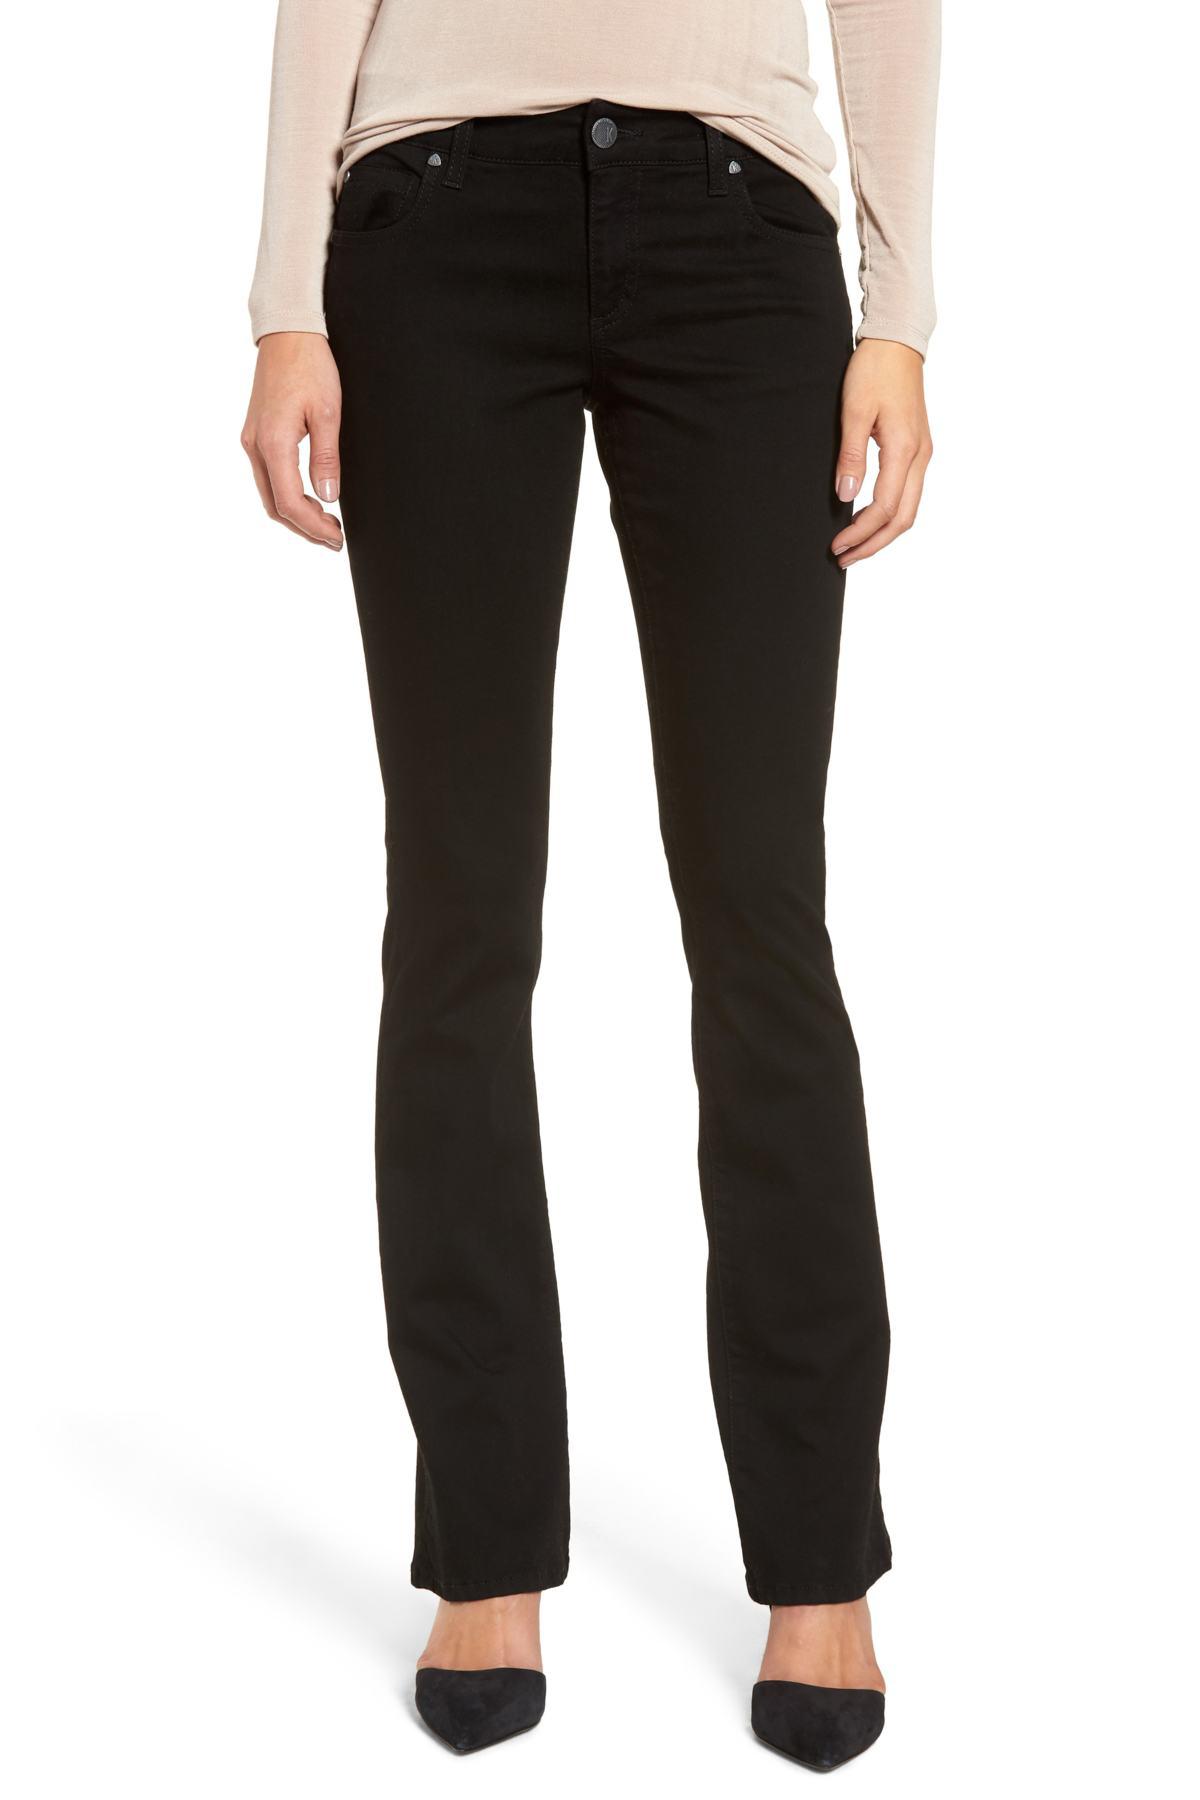 Lyst - Kut From The Kloth Natalie Bootcut Jeans (regular & Petite) in Black